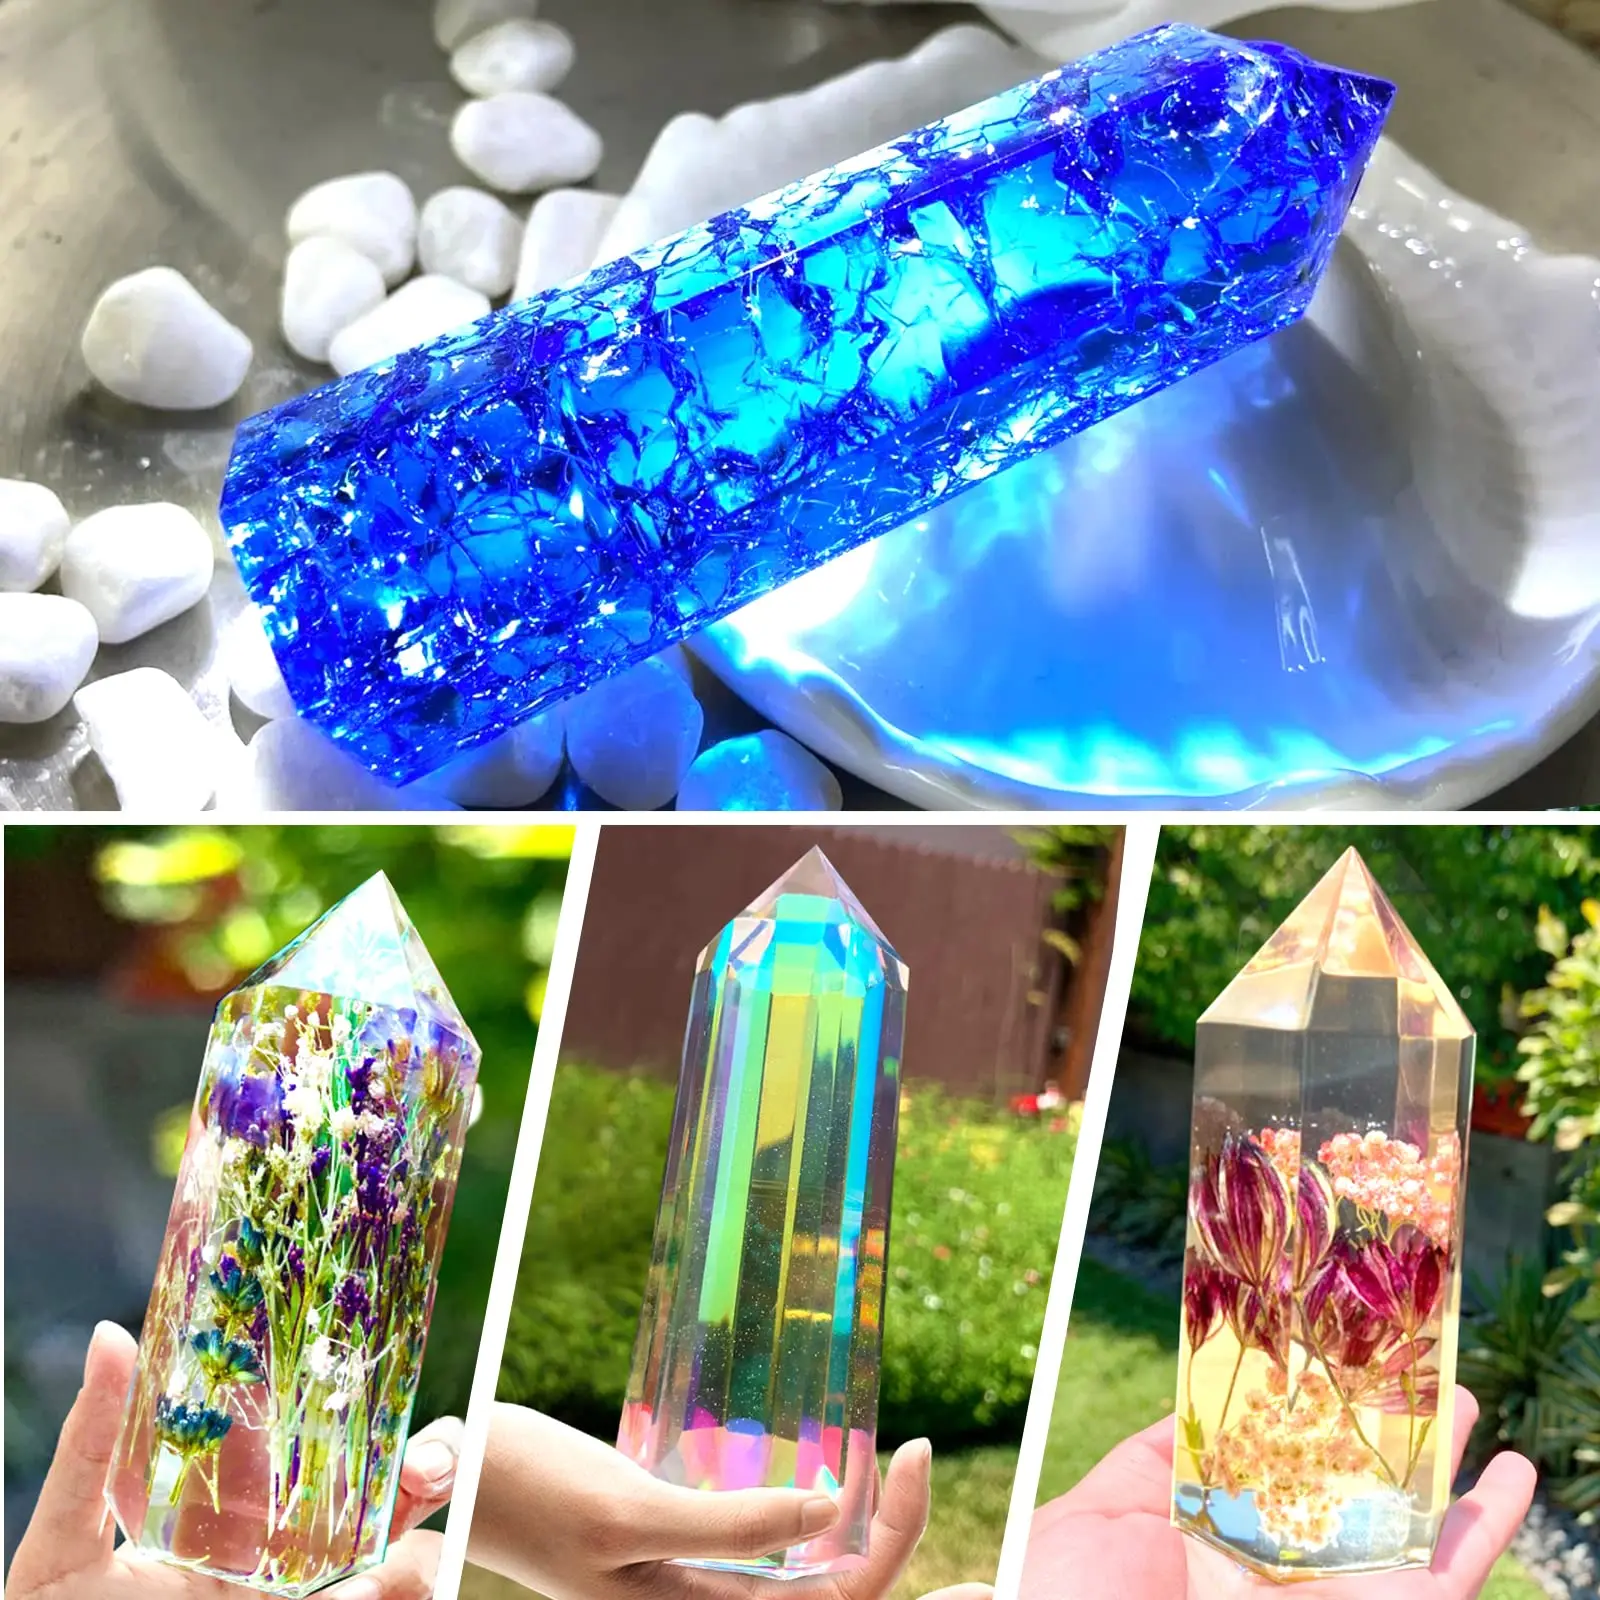 Large Crystal Tower Resin Molds - 3 Pcs - Epoxy Resin Molds,DIY